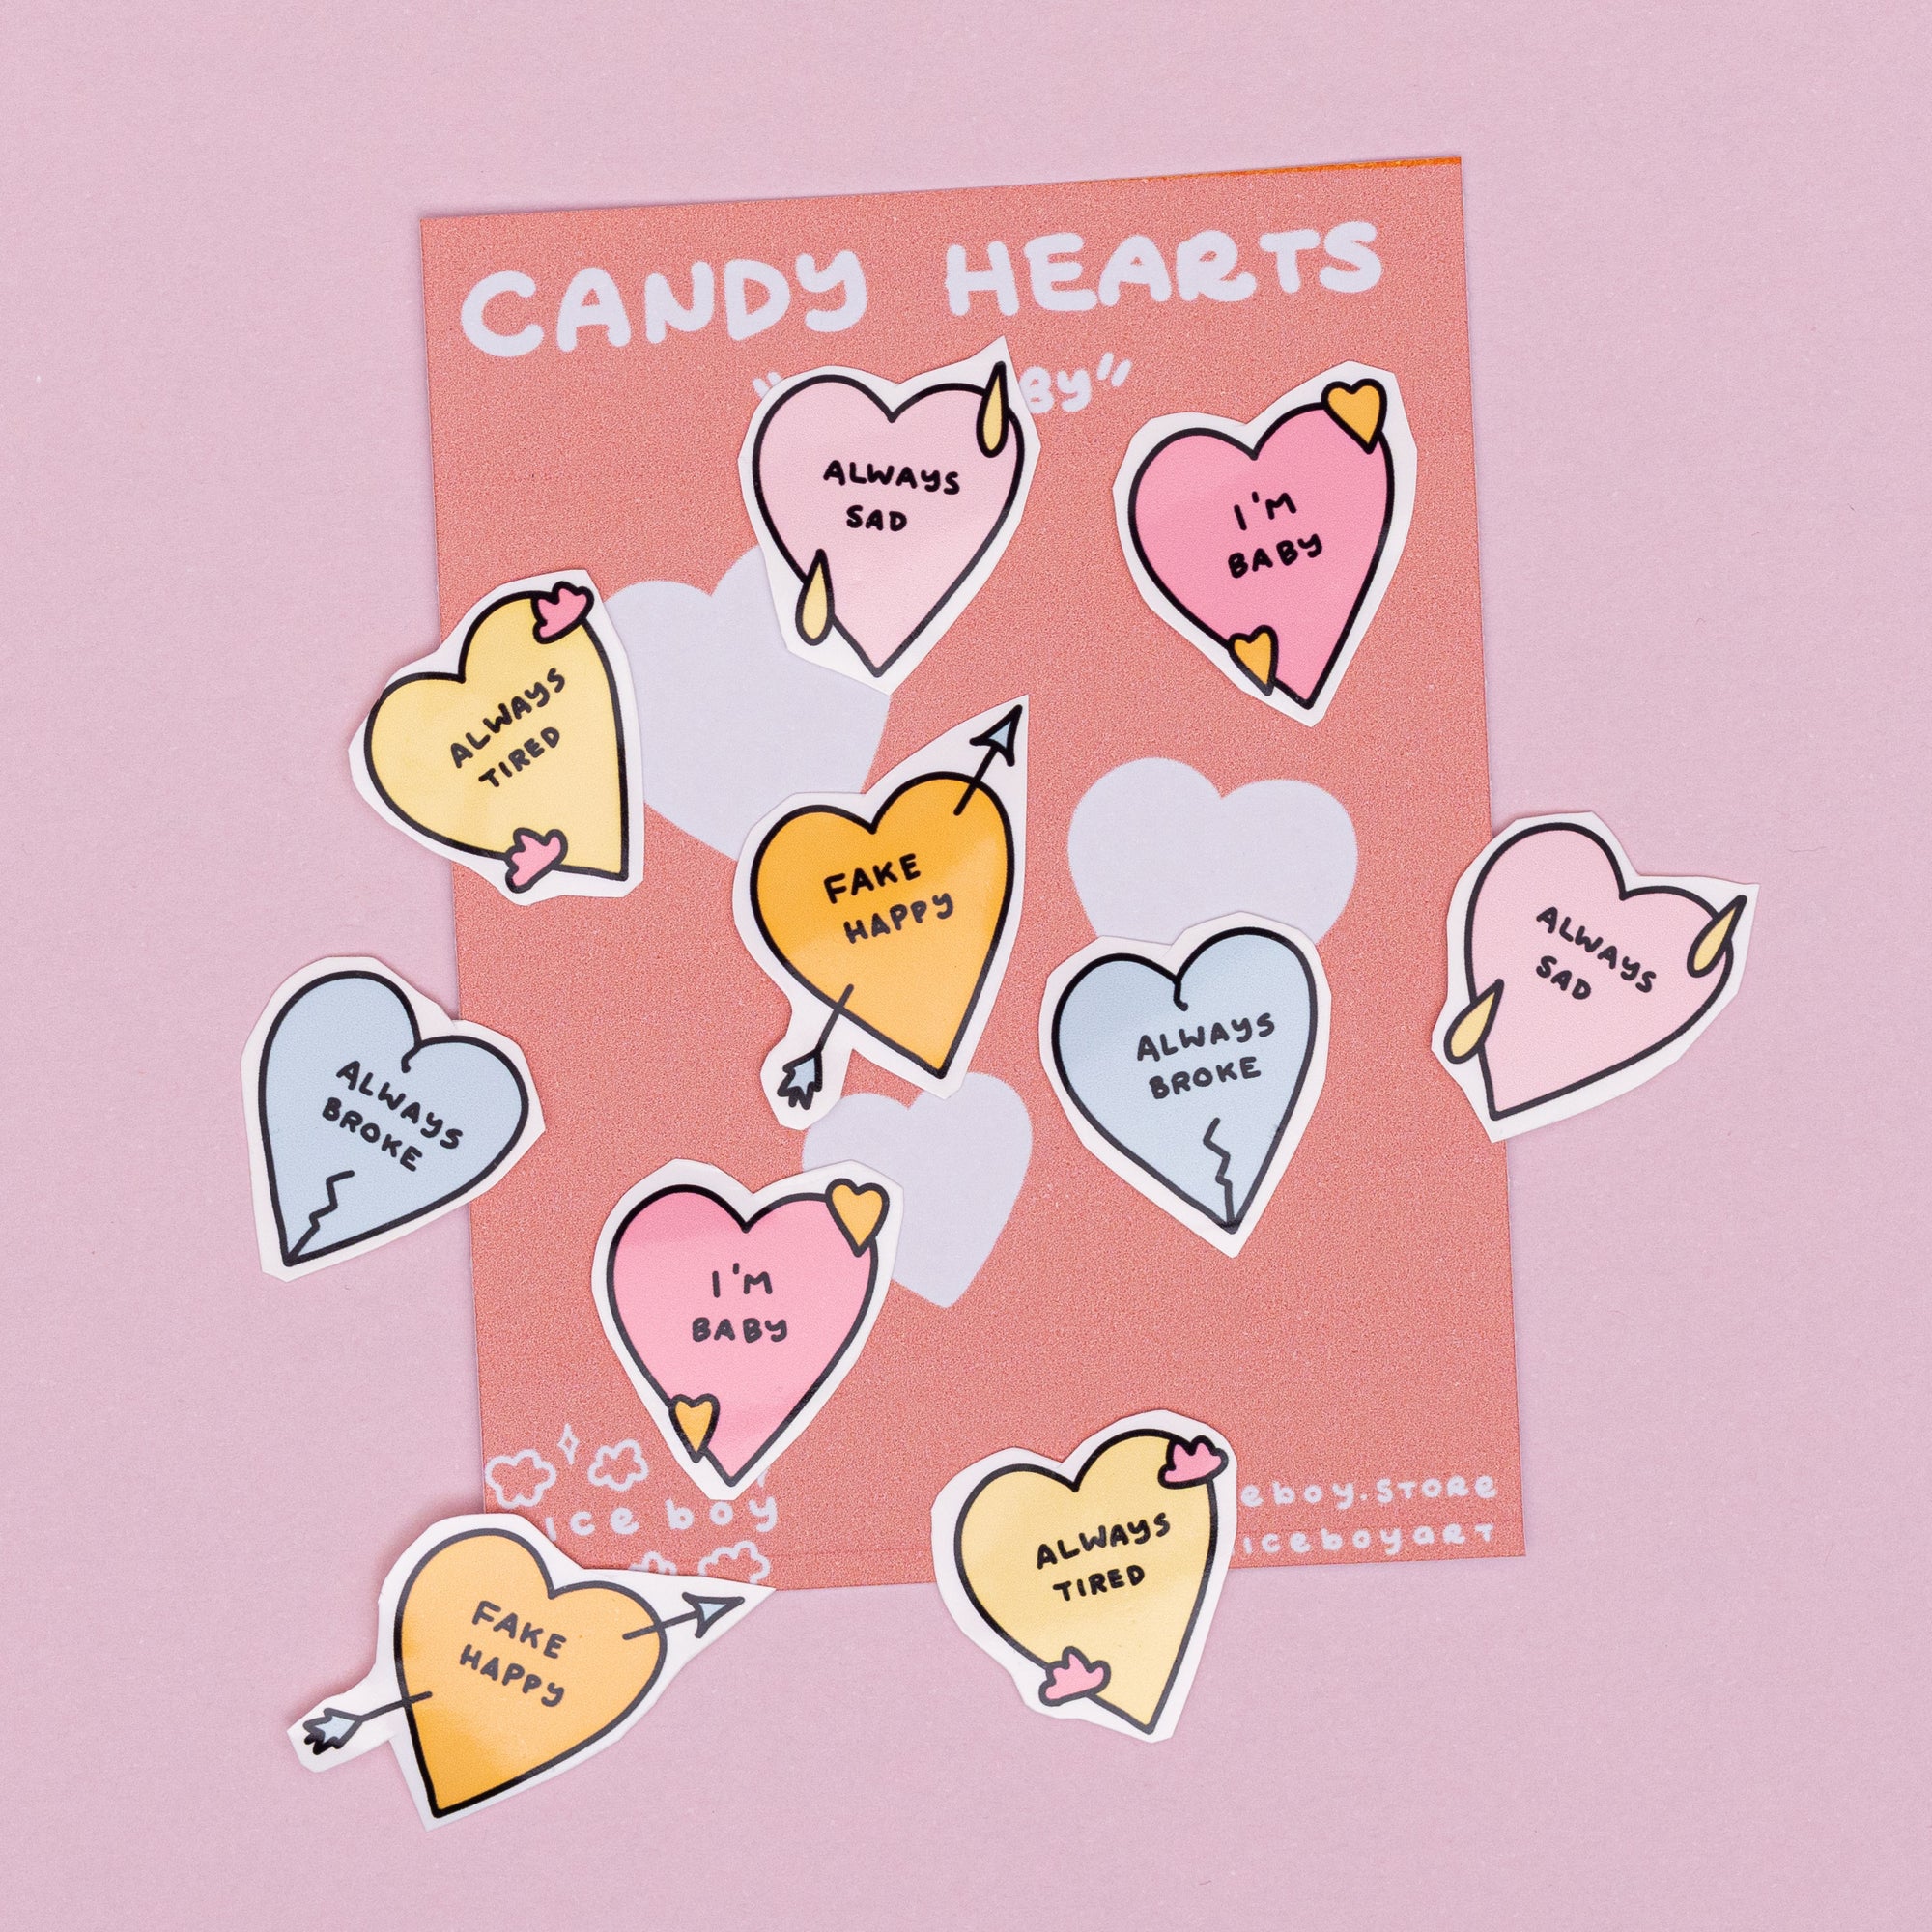 i'm baby / candy heart sticker pack